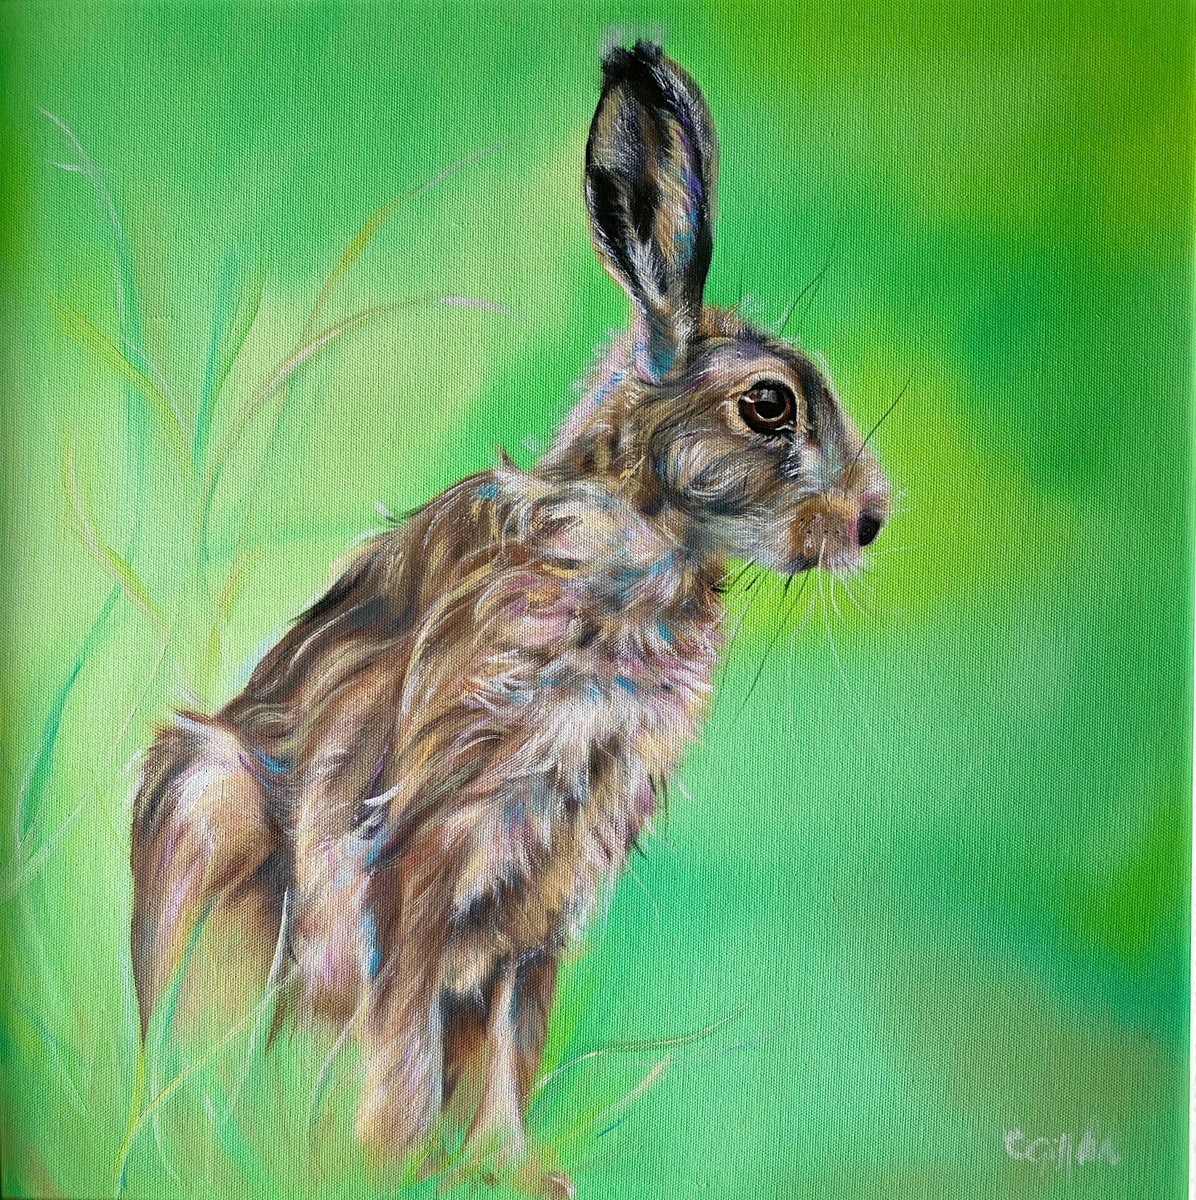 Hare Today, 20 x 20 by Carol Gillan